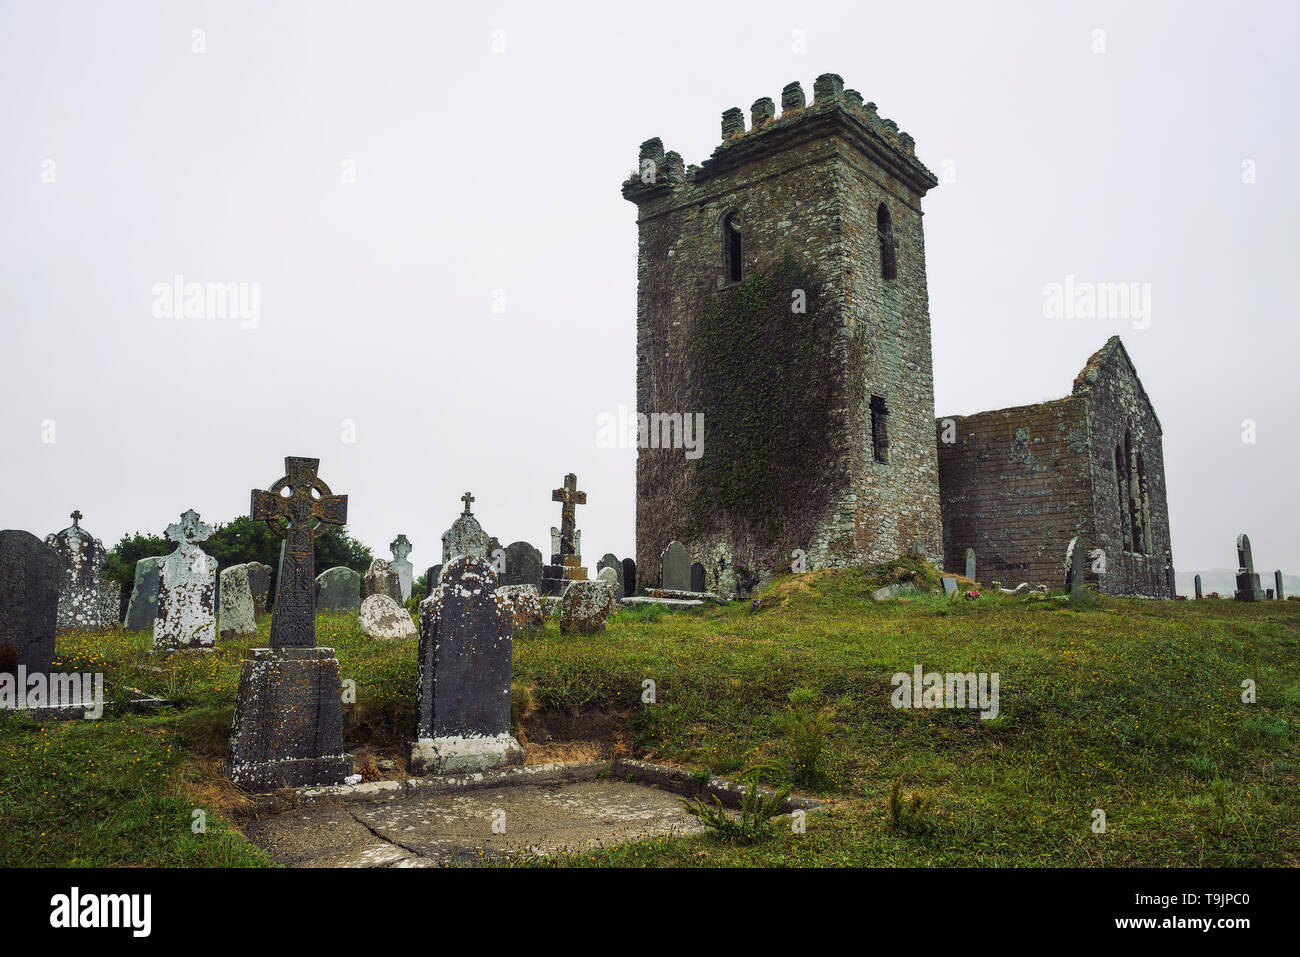 Grave markers and ancient stones from Templar Church in Templetown, Ireland Stock Photo